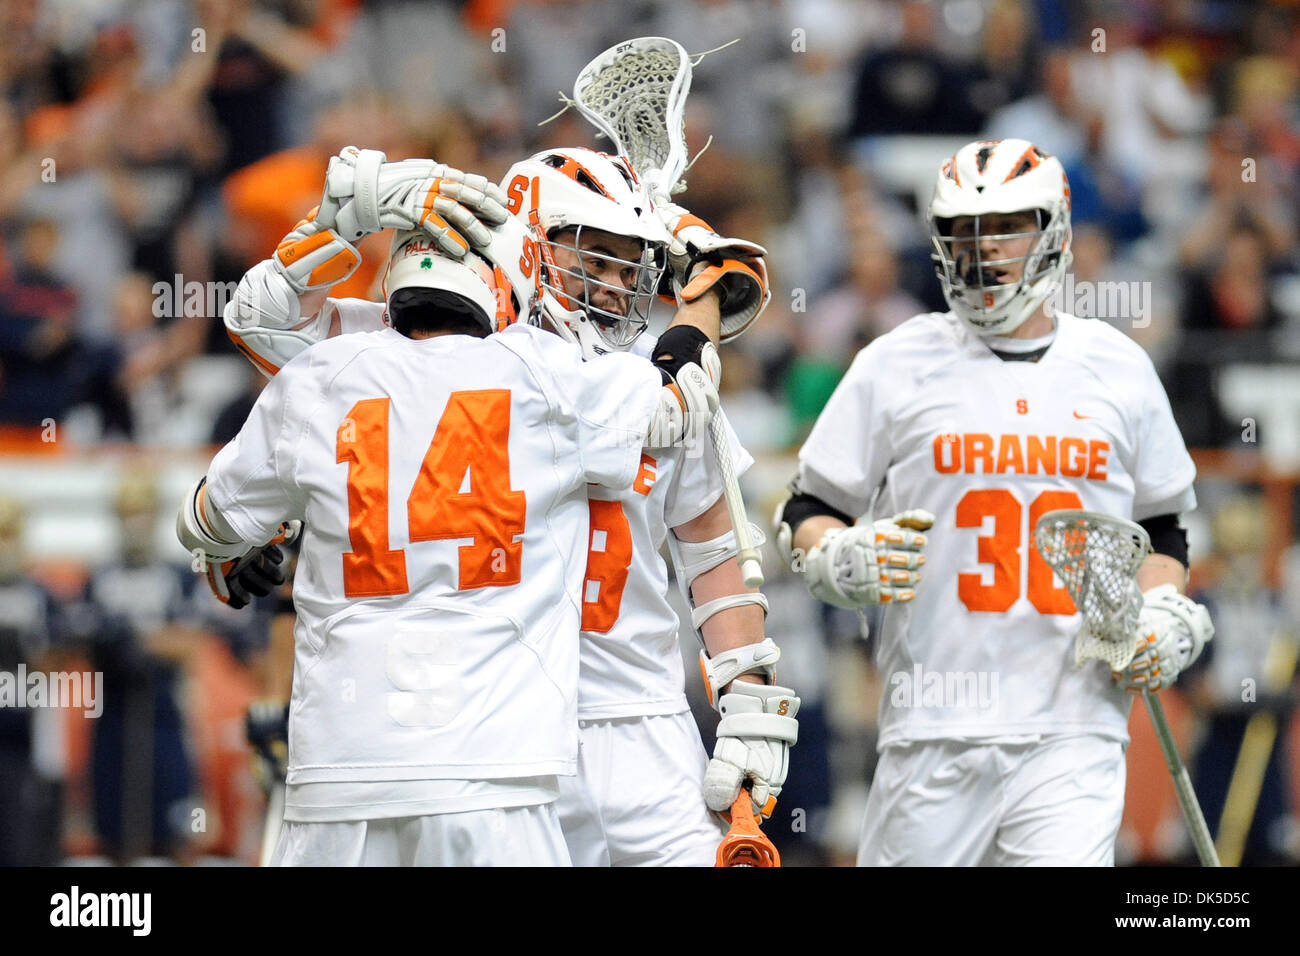 May 1, 2011 - Syracuse, New York, U.S - Syracuse Orange attackman Stephen Keogh (28) celebrates the first quarter goal with teammate Syracuse Orange attackman Tom Palasek (14) against the Notre Dame Fighting Irish. Syracuse defeated top ranked Notre Dame 11-8 at the Carrier Dome in Syracuse, NY. (Credit Image: © Michael Johnson/Southcreek Global/ZUMAPRESS.com) Stock Photo